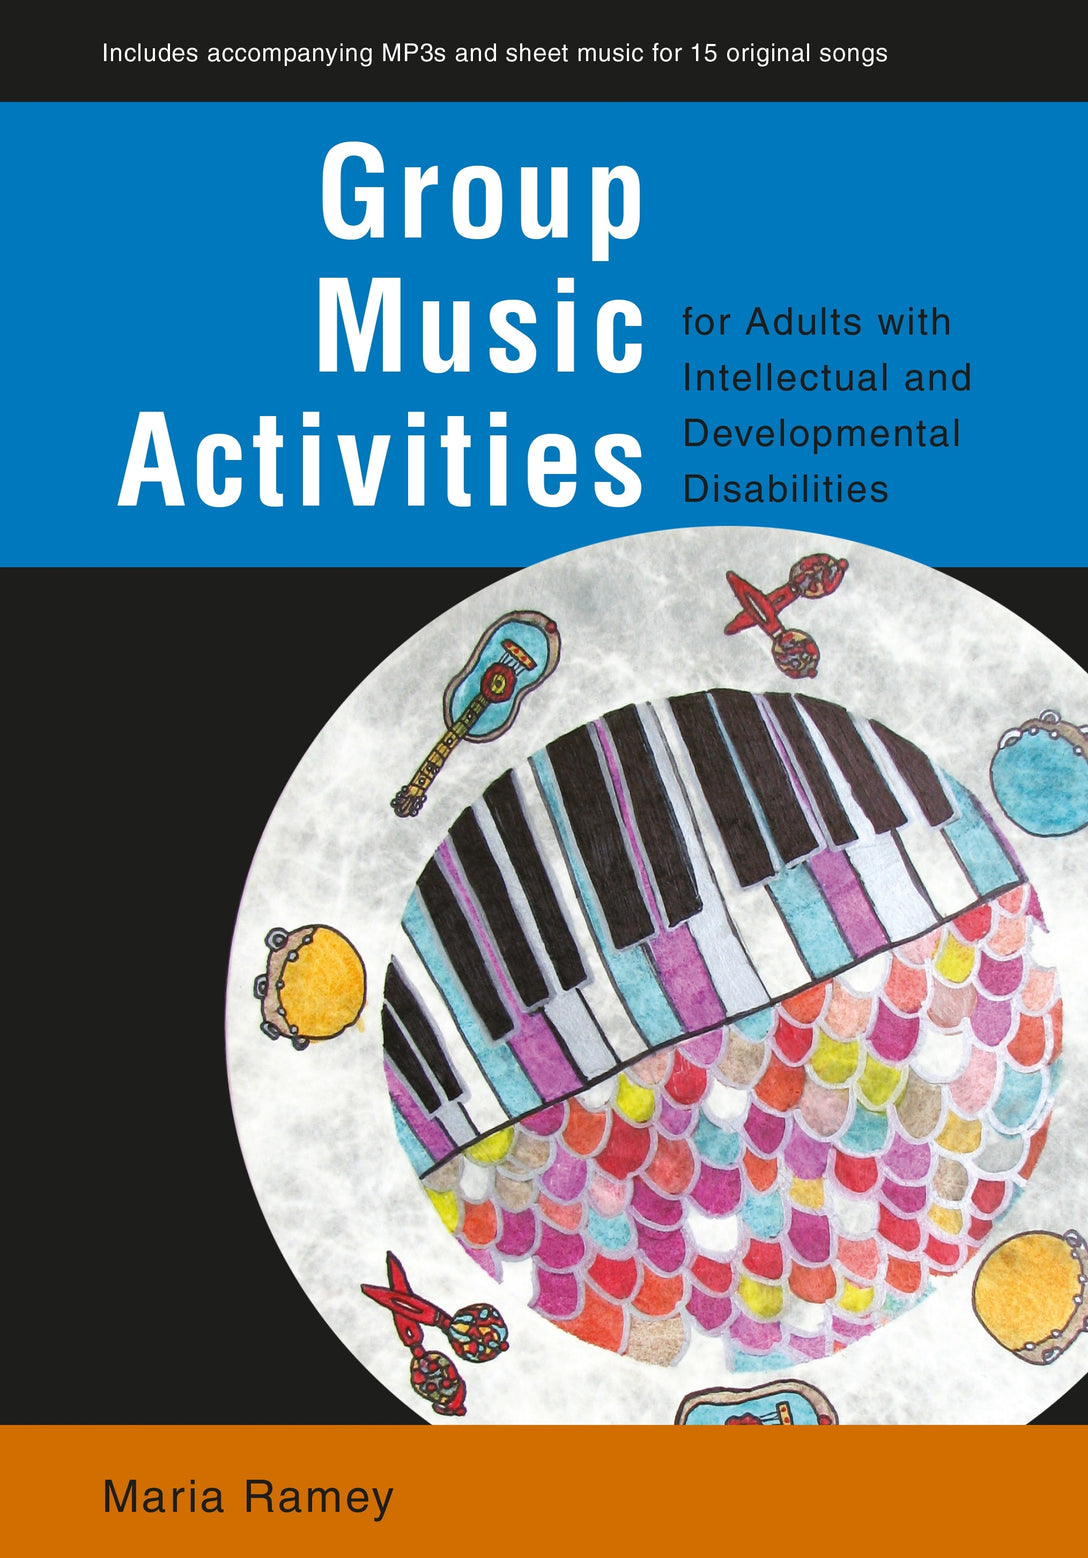 Group Music Activities for Adults with Intellectual and Developmental Disabilities by Maria Ramey